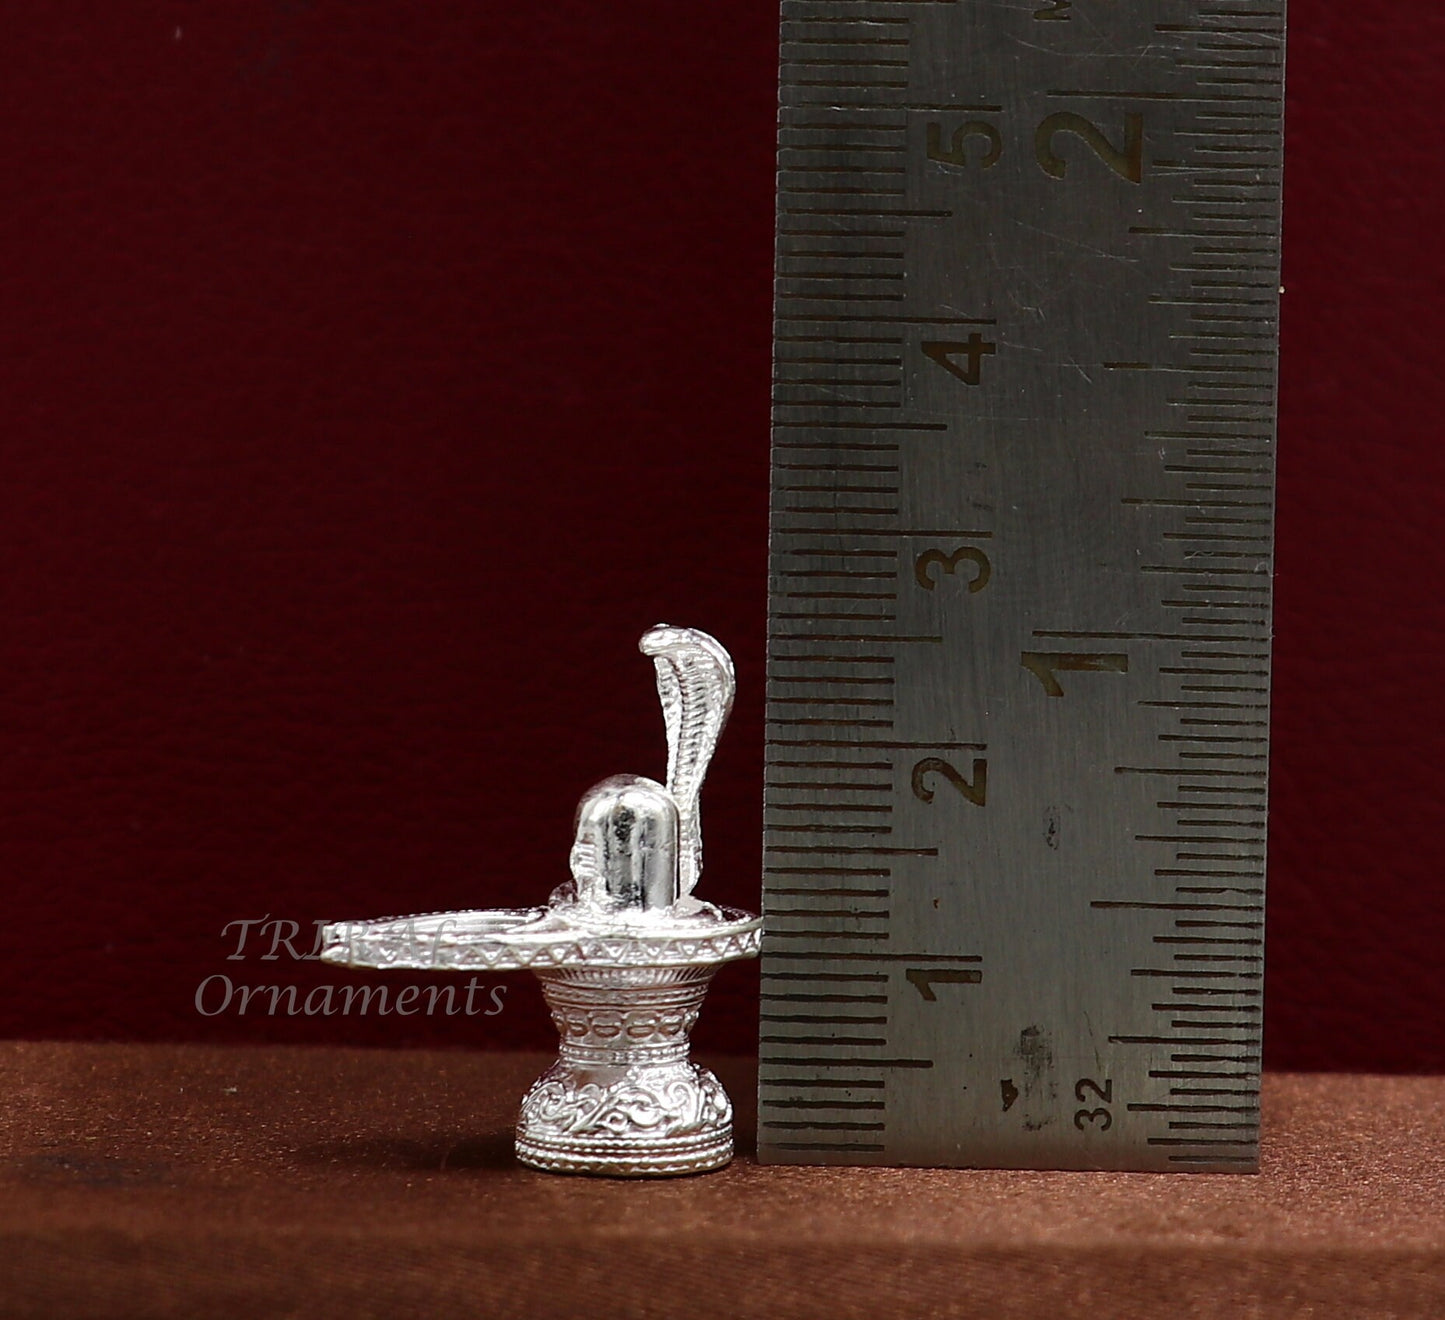 1" 925 sterling silver handmade small solid Lord Shiva lingam stand, silver Shivling puja article, for wealth and prosperity art594 - TRIBAL ORNAMENTS